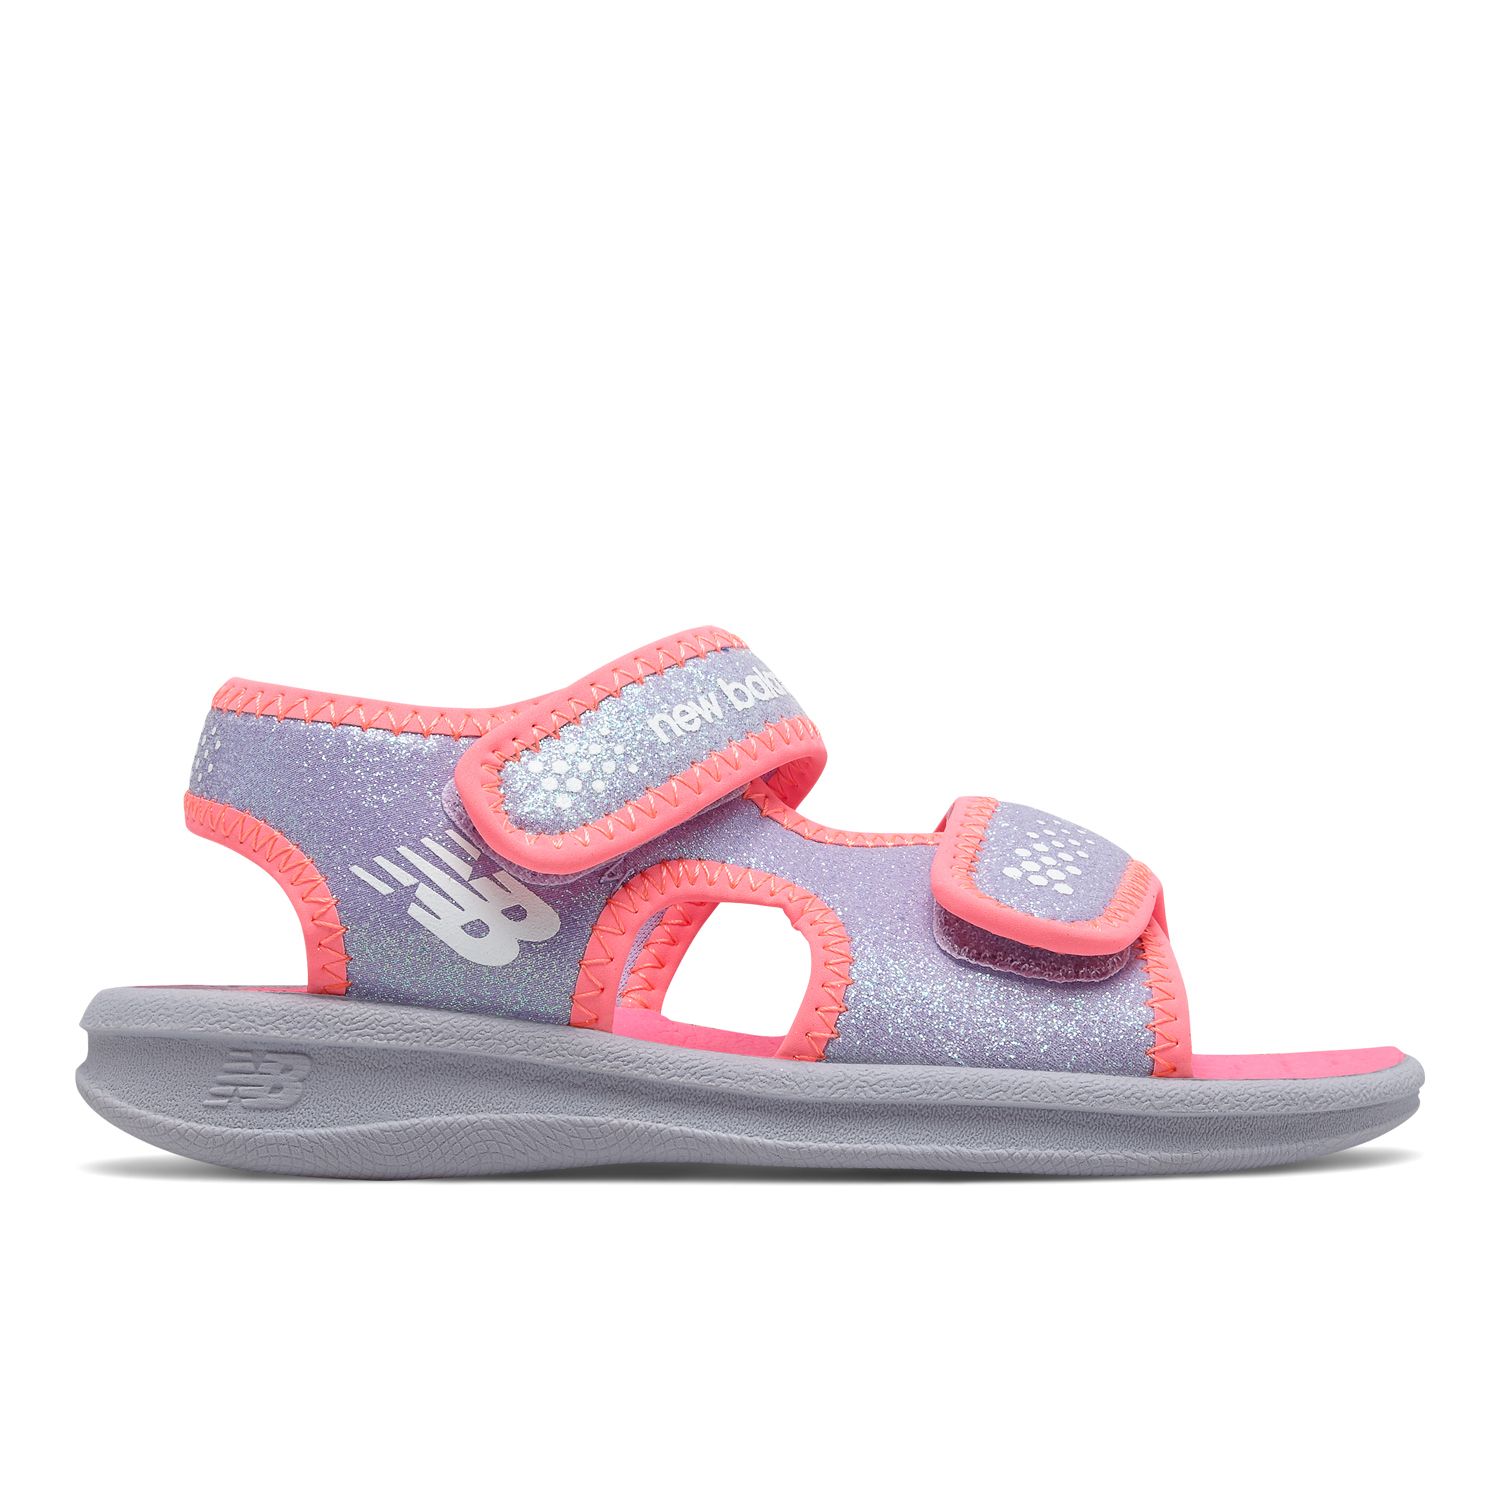 new balance youth sandals